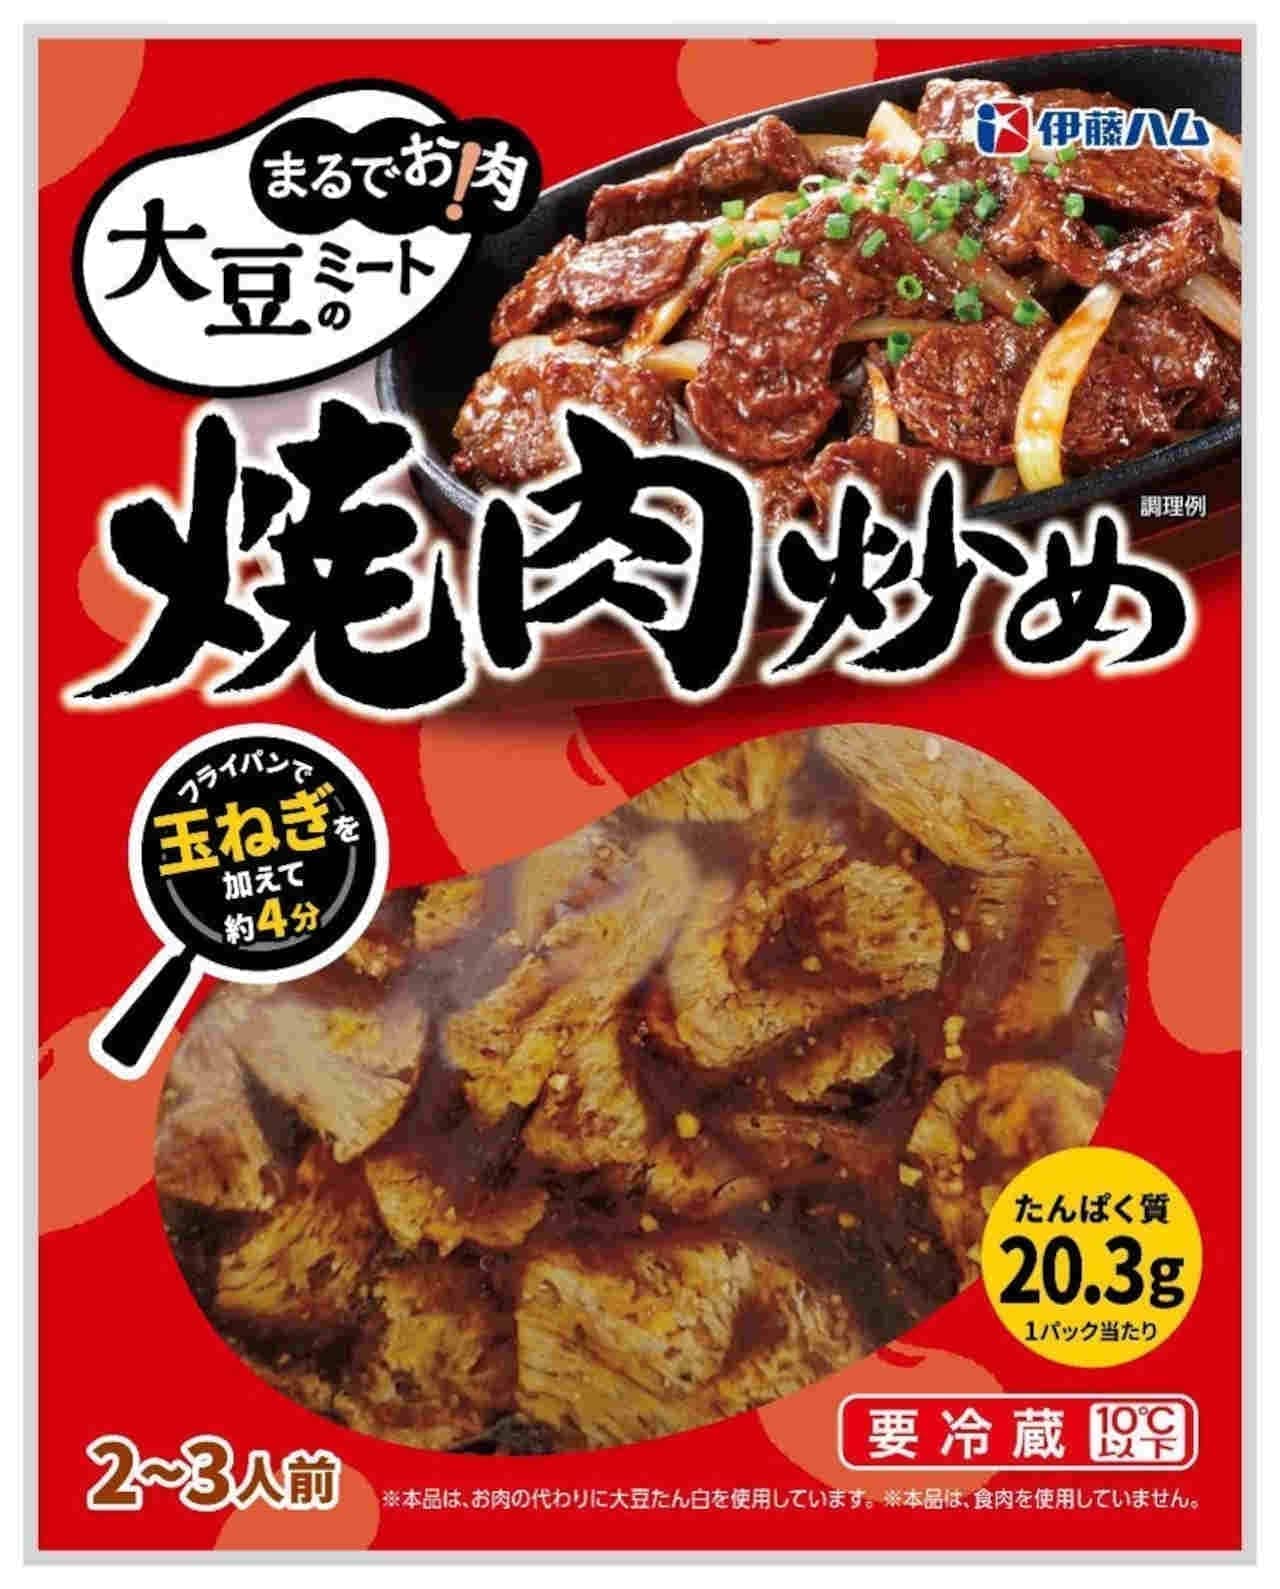 Itoham's soy meat "It's like meat!"